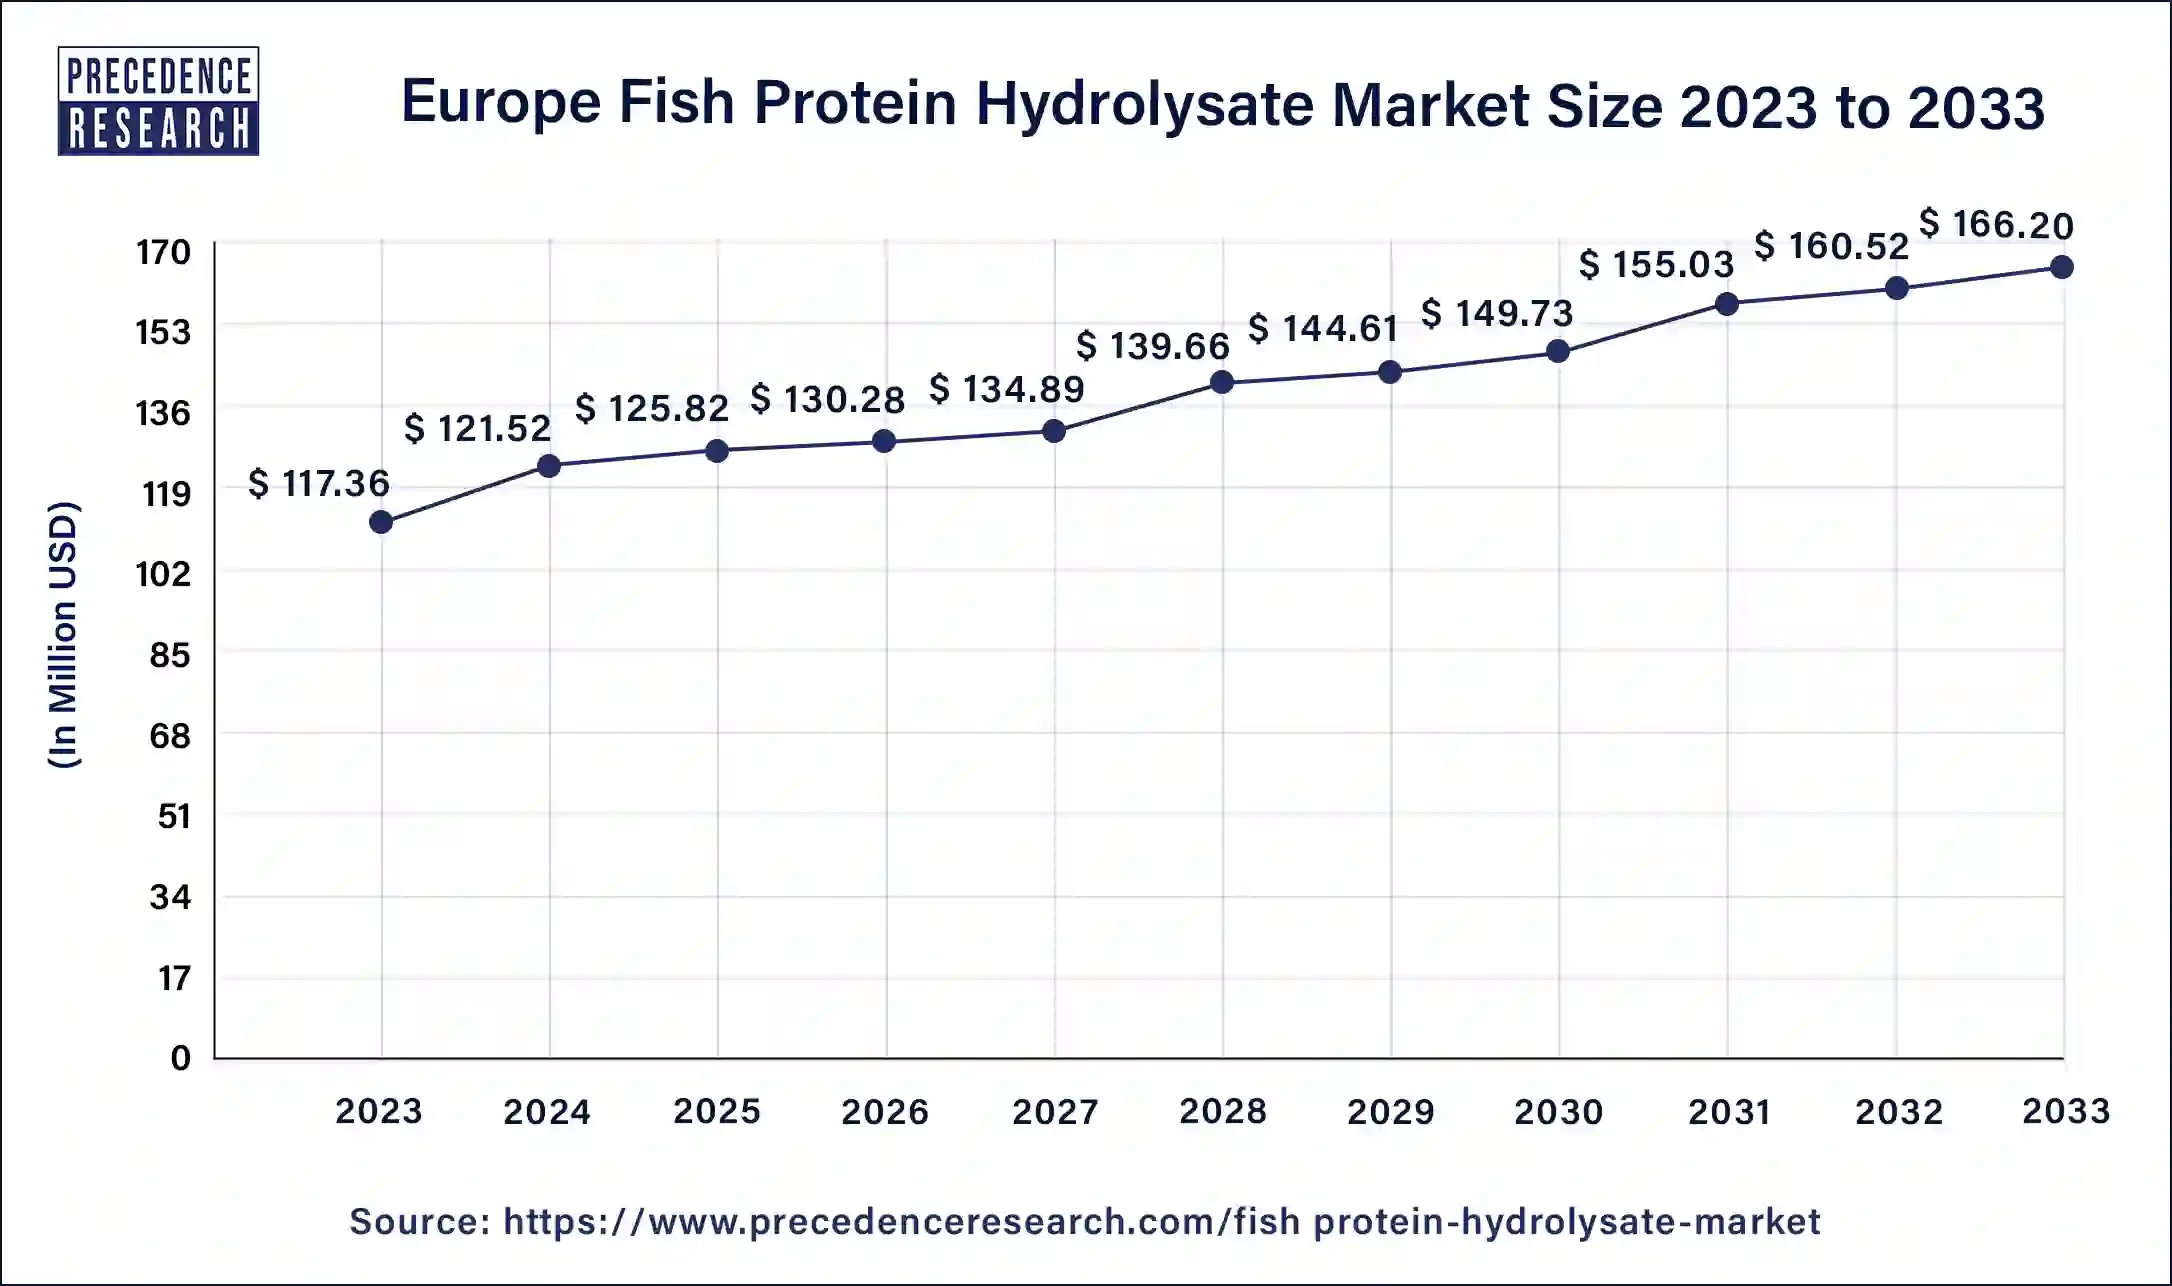 Europe Fish Protein Hydrolysate Market Size 2024 to 2033